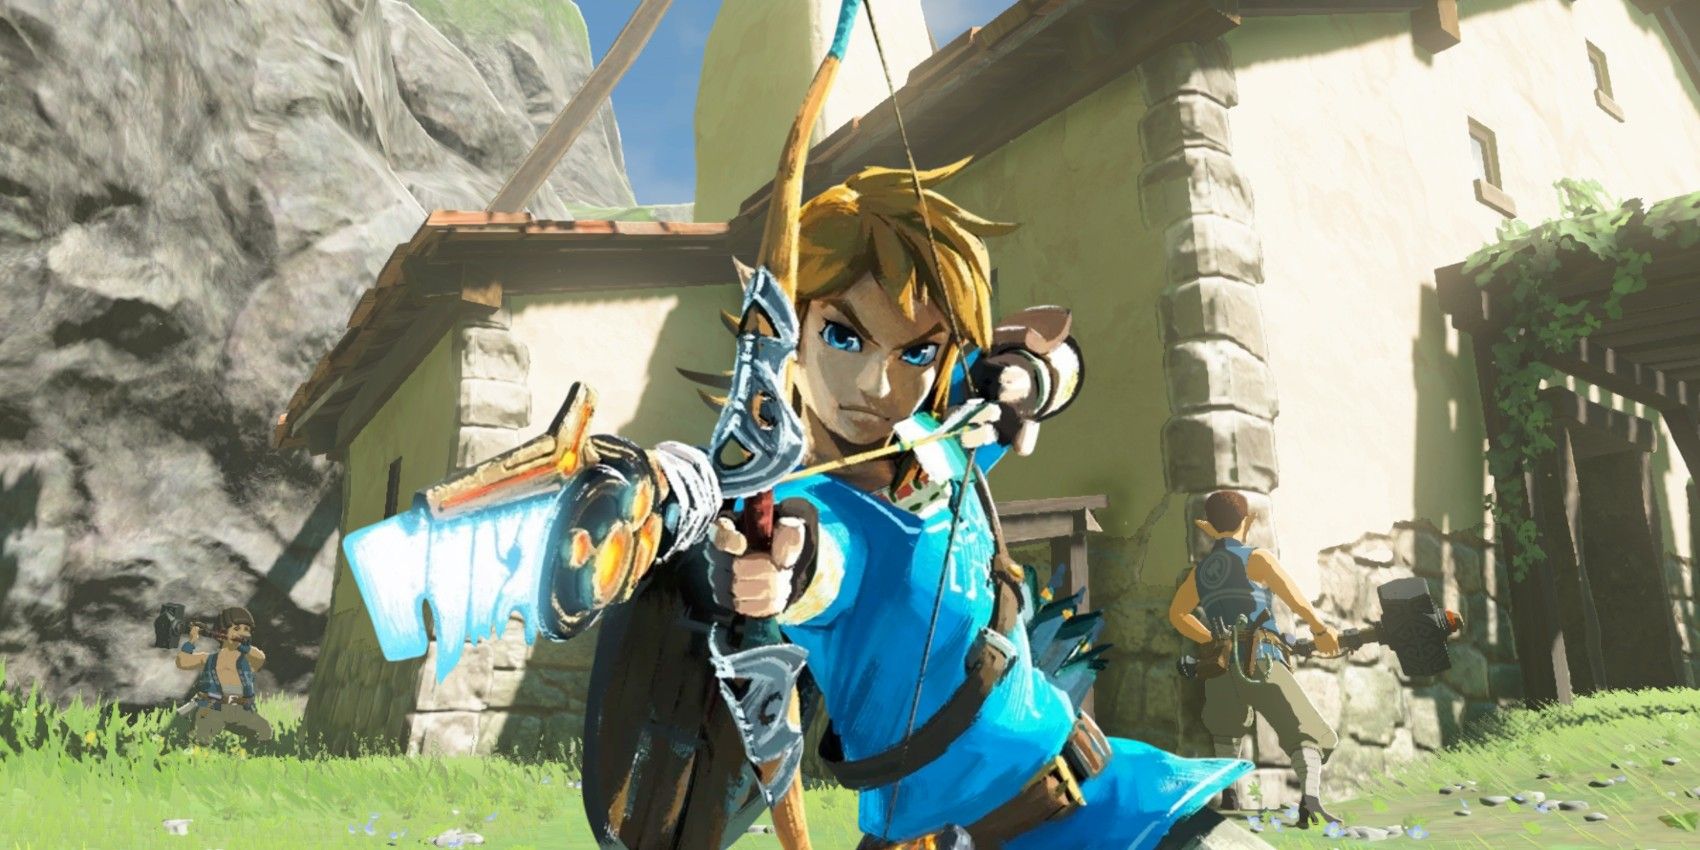 Link aiming bow at camera in front of his renovated house from The legend of Zelda: Breath of the Wild